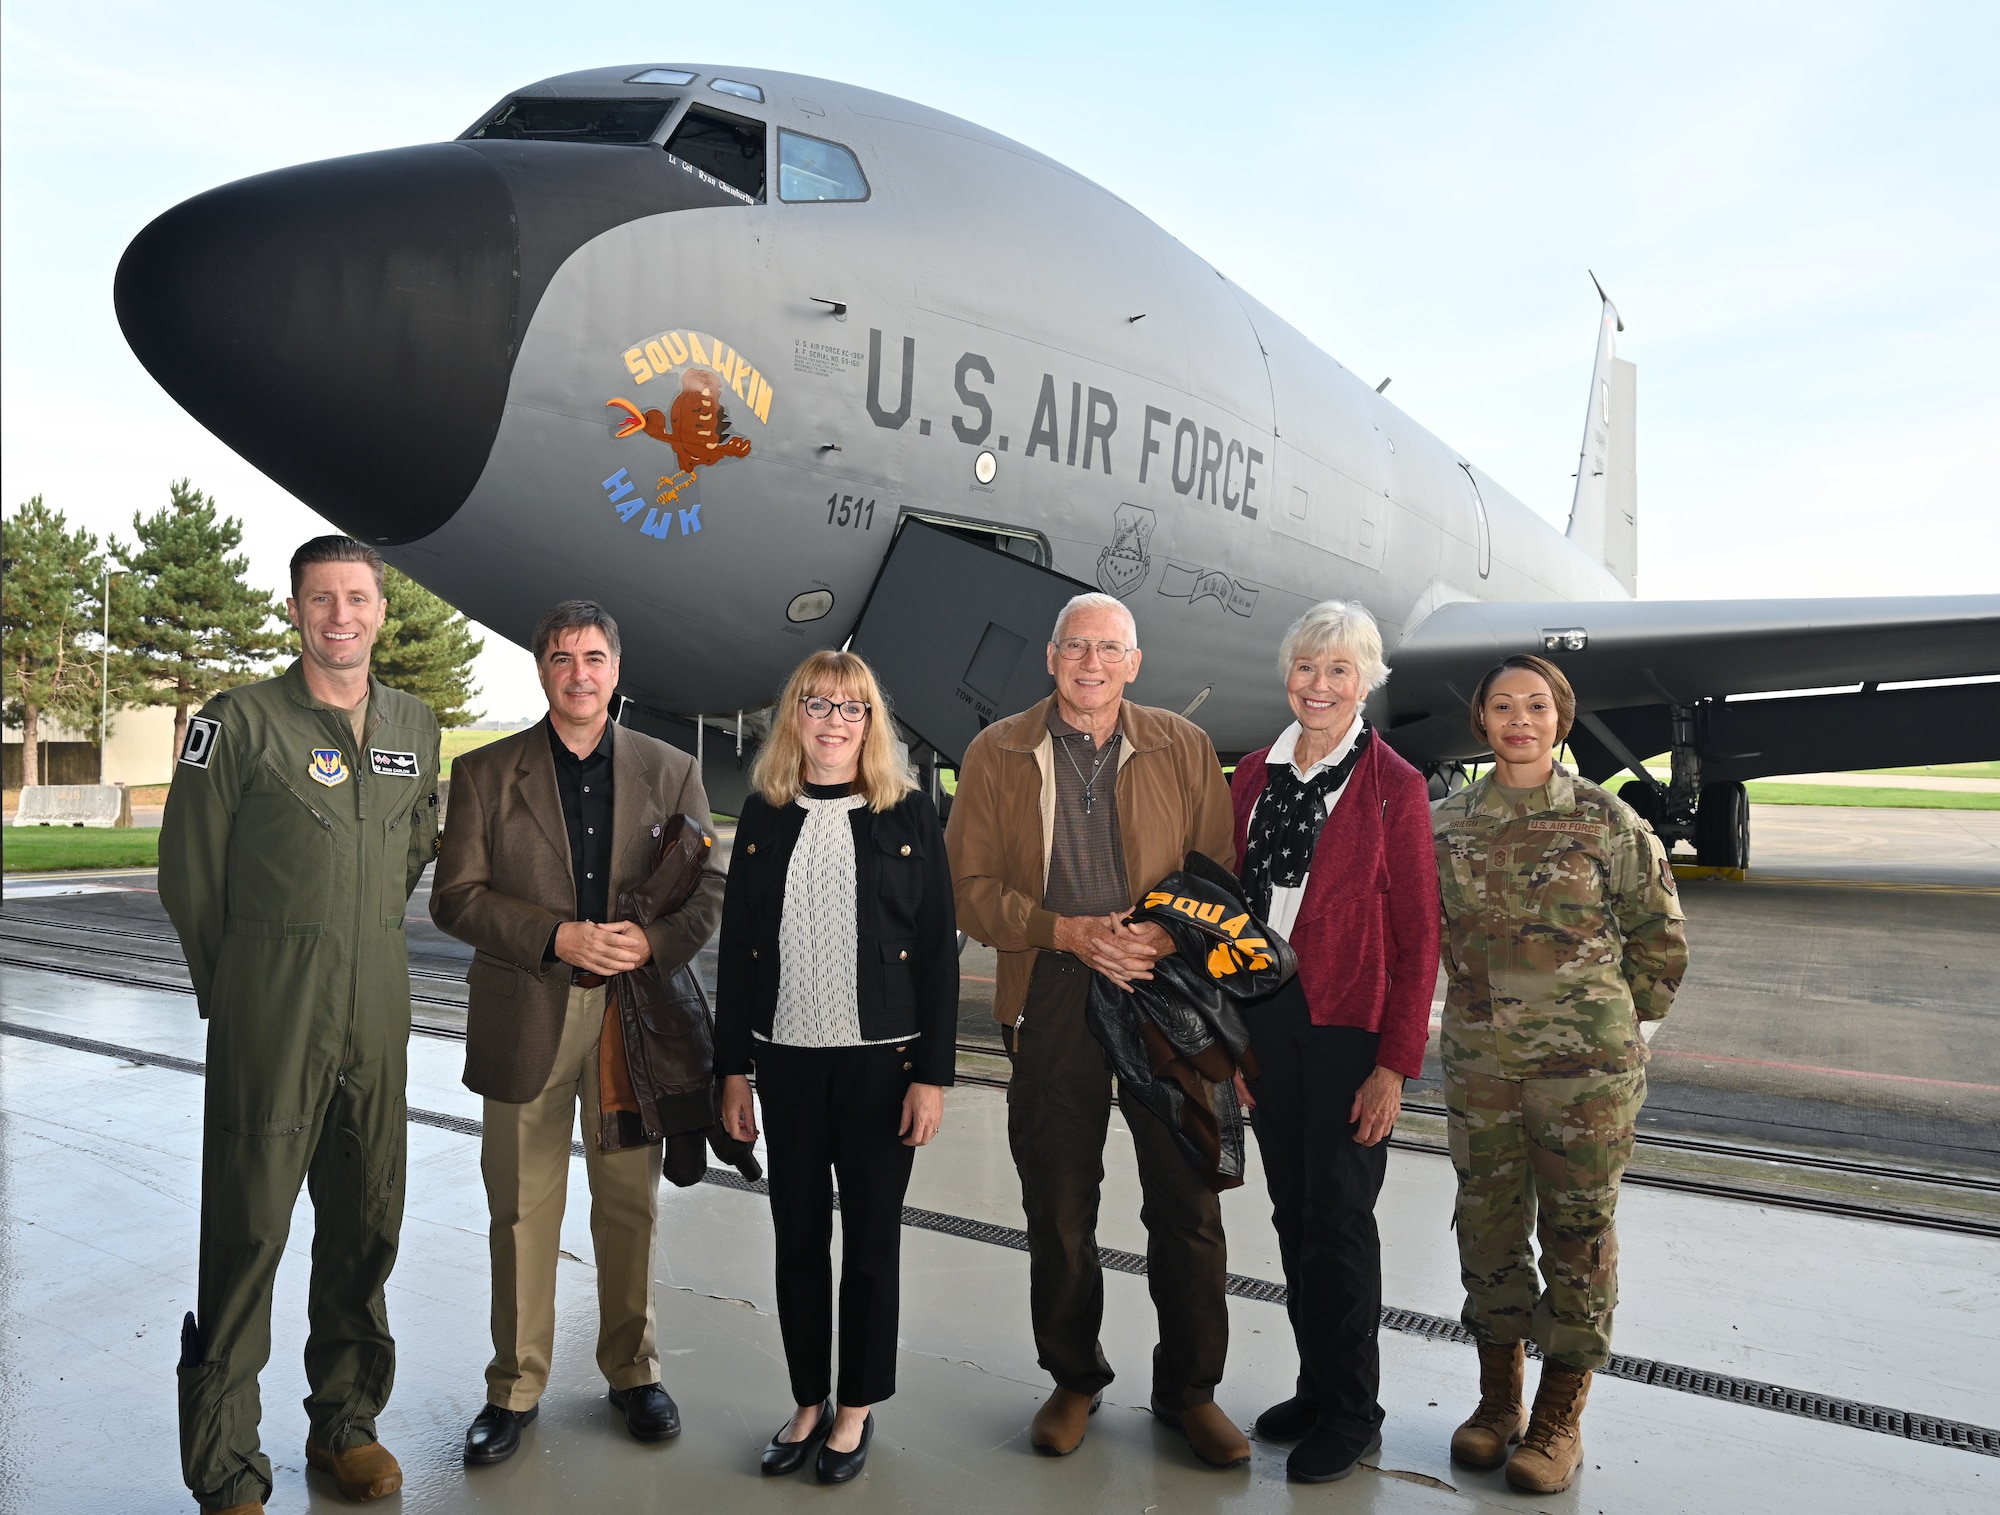 U.S. Air Force Col. Ryan Garlow, left, 100th Air Refueling Wing commander, and Chief Master Sgt. Tiffany Griego, right, 100th ARW command chief, show of the latest heritage nose art, “Squawkin Hawk,” on a KC-135 Stratotanker with family members of the original World War II crew of “Squawkin Hawk,” a B-17 Flying Fortress, at Royal Air Force Mildenhall, England, Oct. 10, 2023. The 100th Air Refueling Wing held a ceremony to unveil two additional heritage nose arts to its fleet, in honor of those who served at Thorpe Abbotts during World War II, many of whom made the ultimate sacrifice. (U.S. Air Force photo by Karen Abeyasekere)